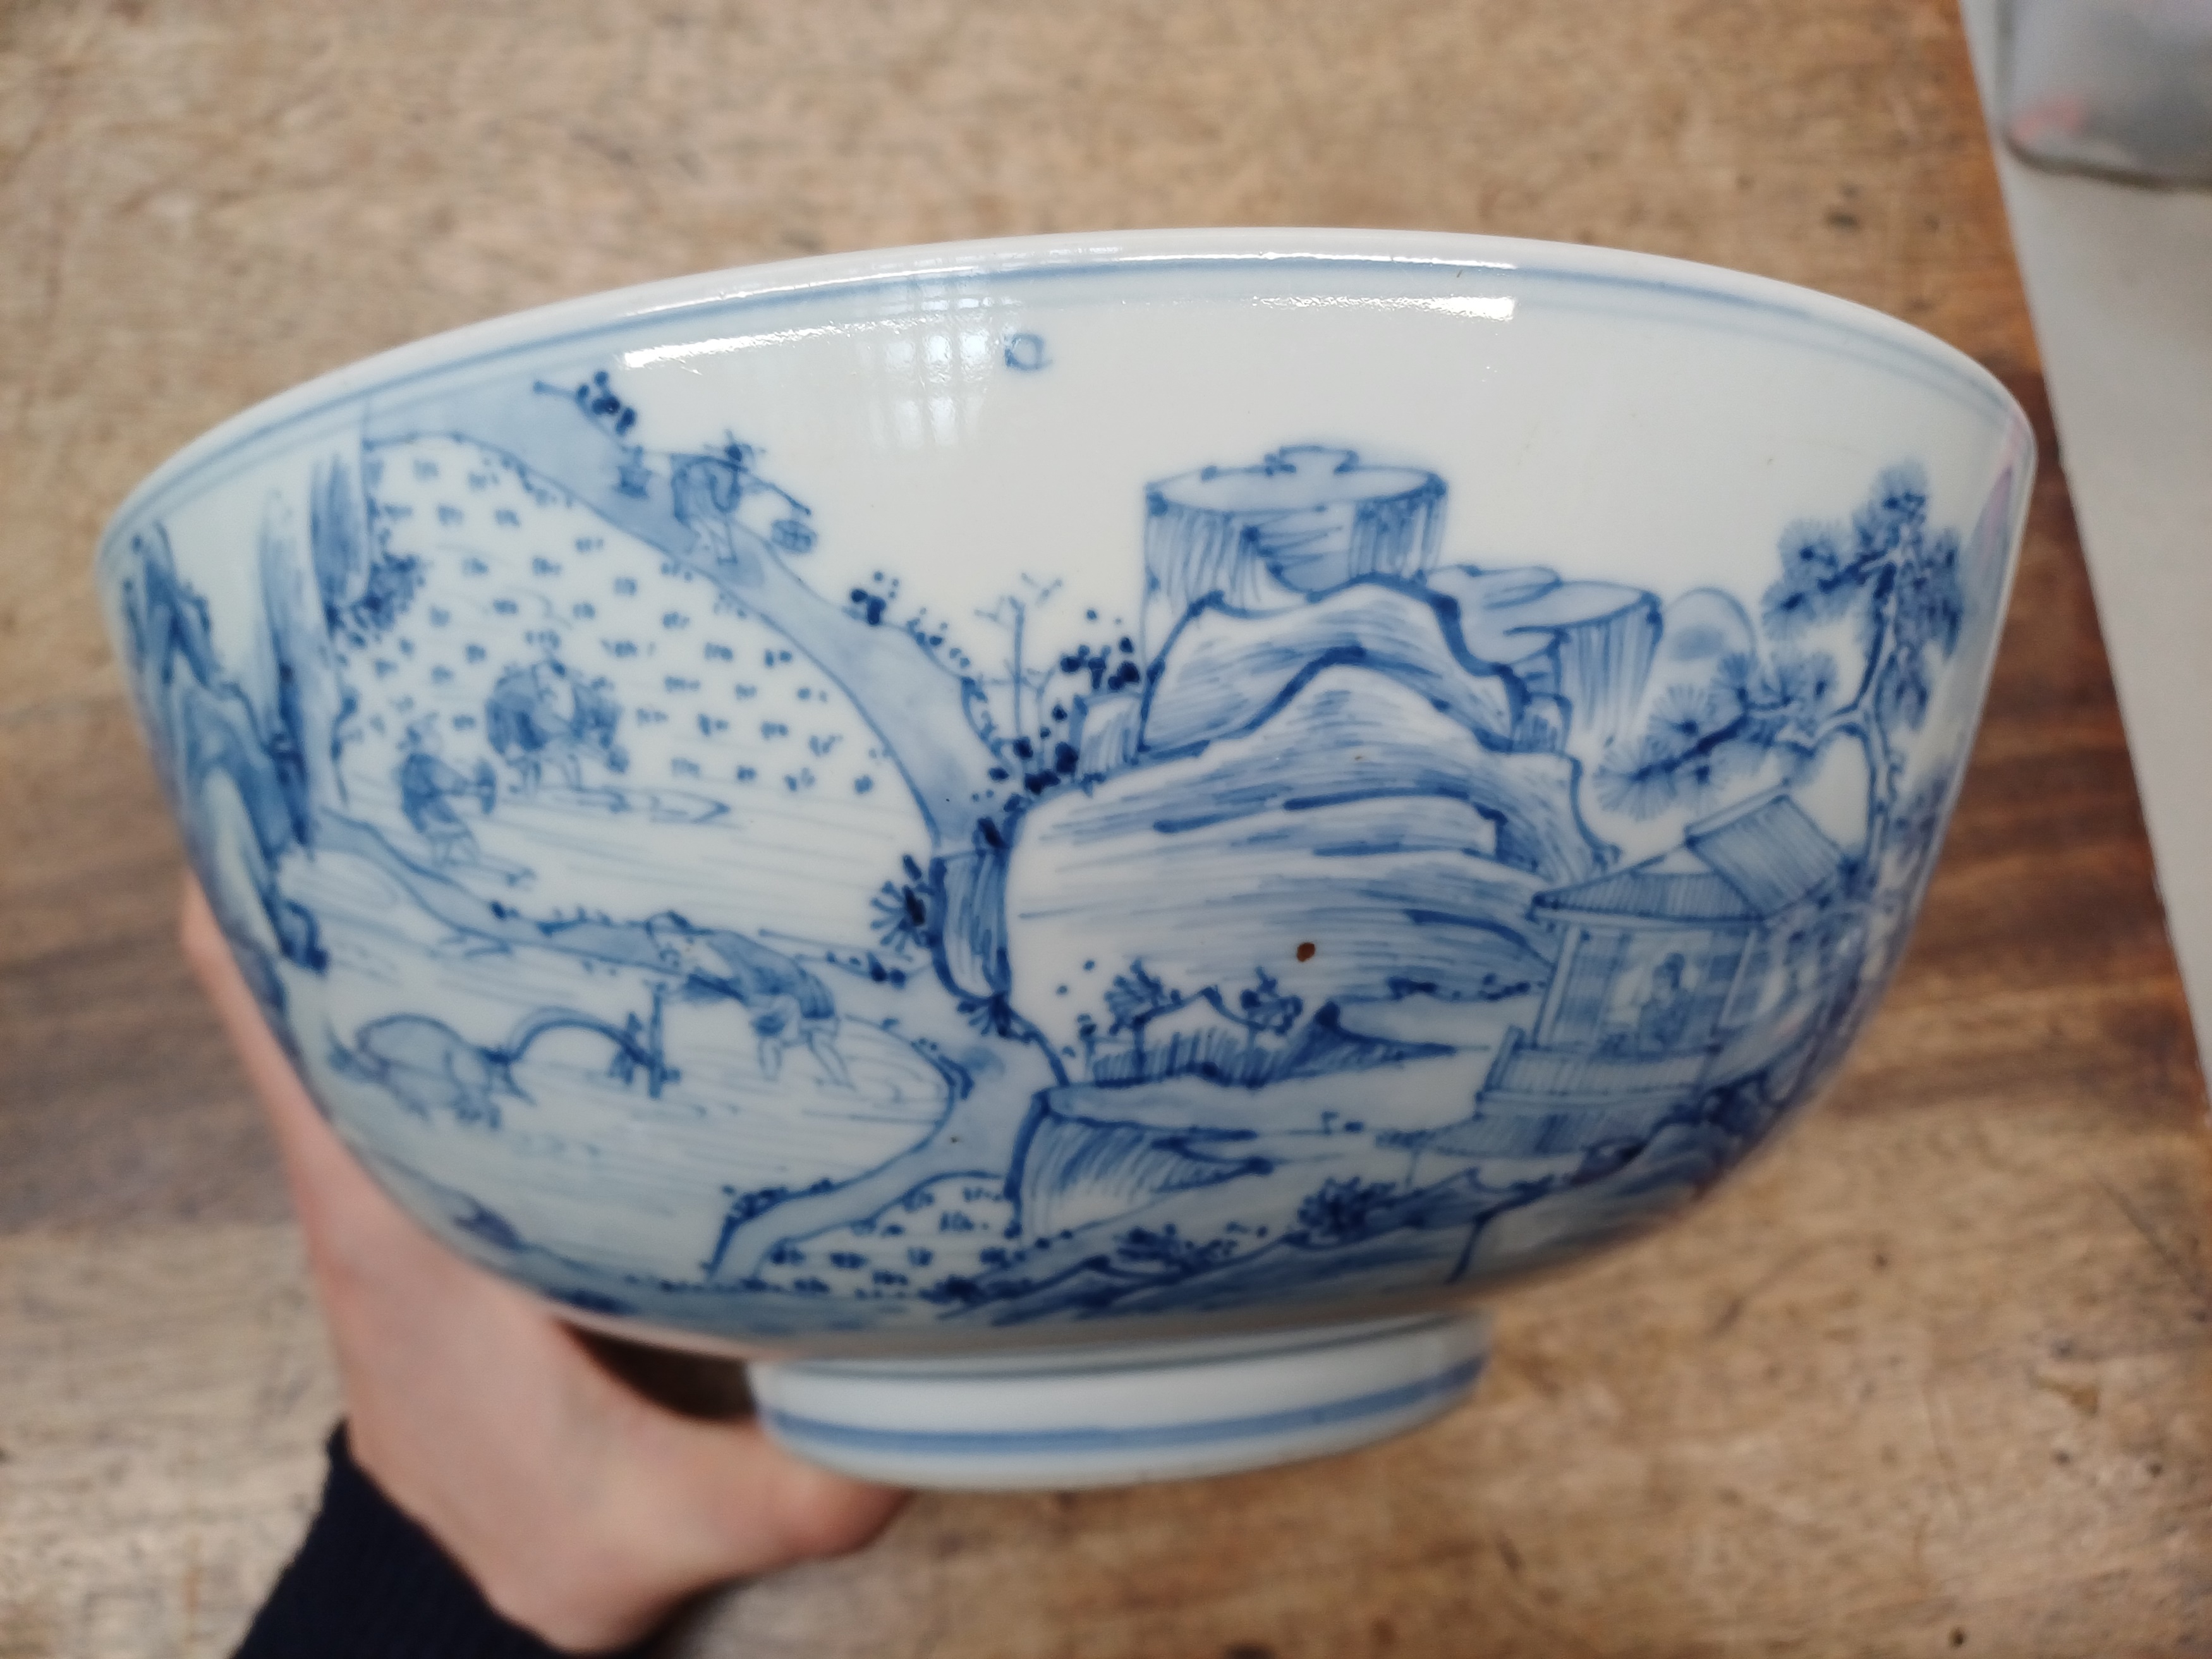 A RARE CHINESE BLUE AND WHITE 'MASTER OF THE ROCKS' BOWL 清康熙或雍正 青花山水人物圖紋盌 - Image 7 of 19